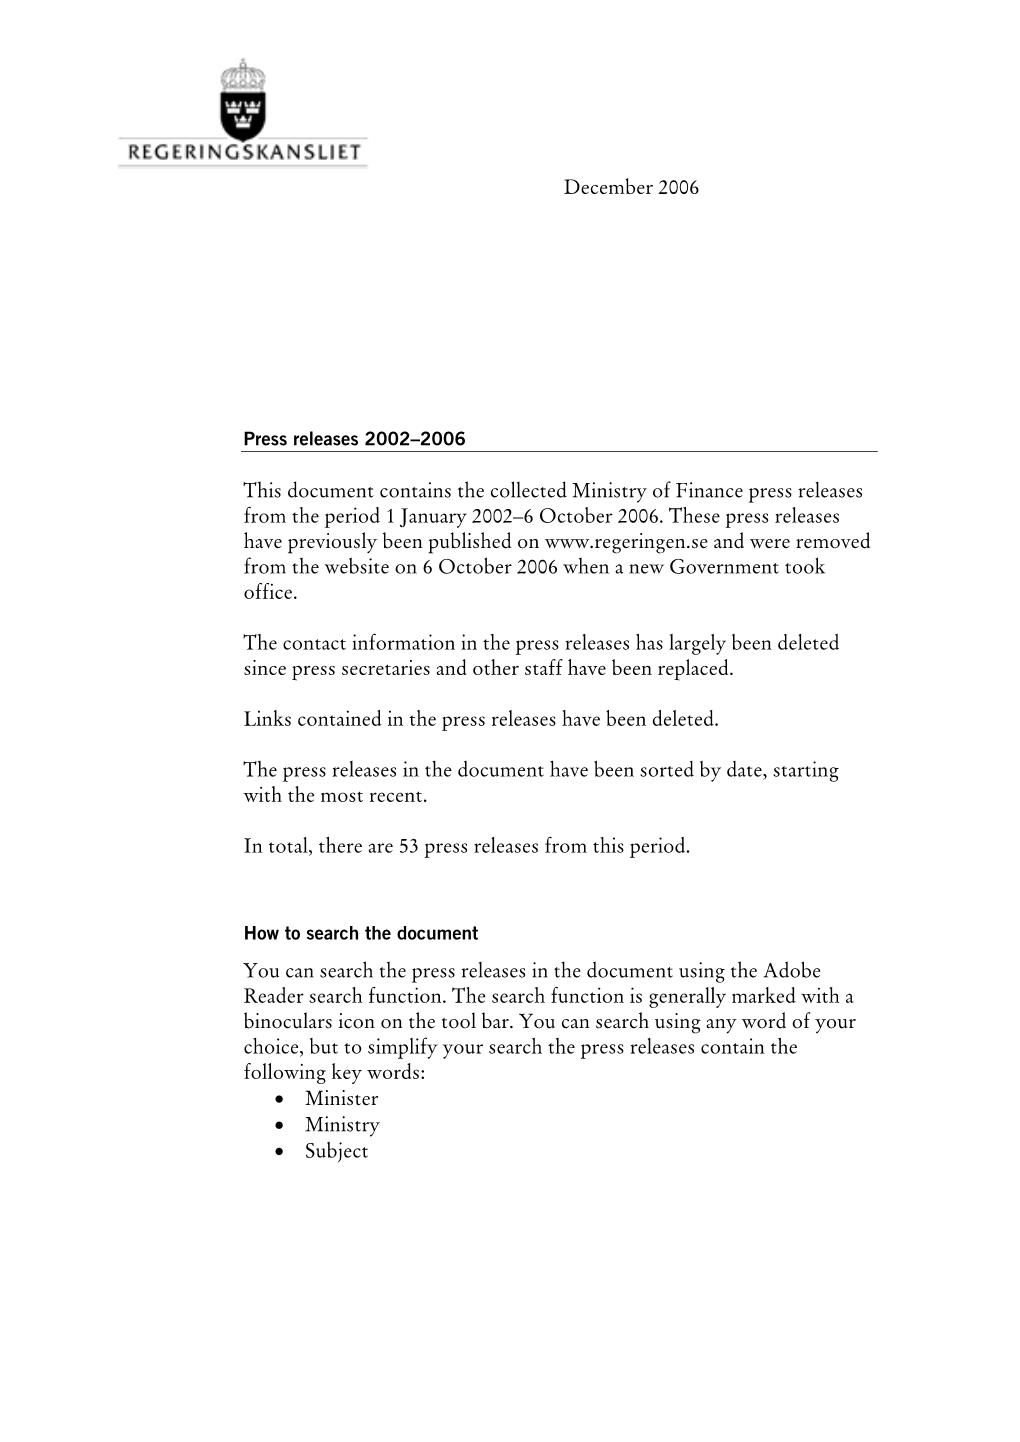 Ministry of Finance Press Releases from the Period 1 January 2002–6 October 2006